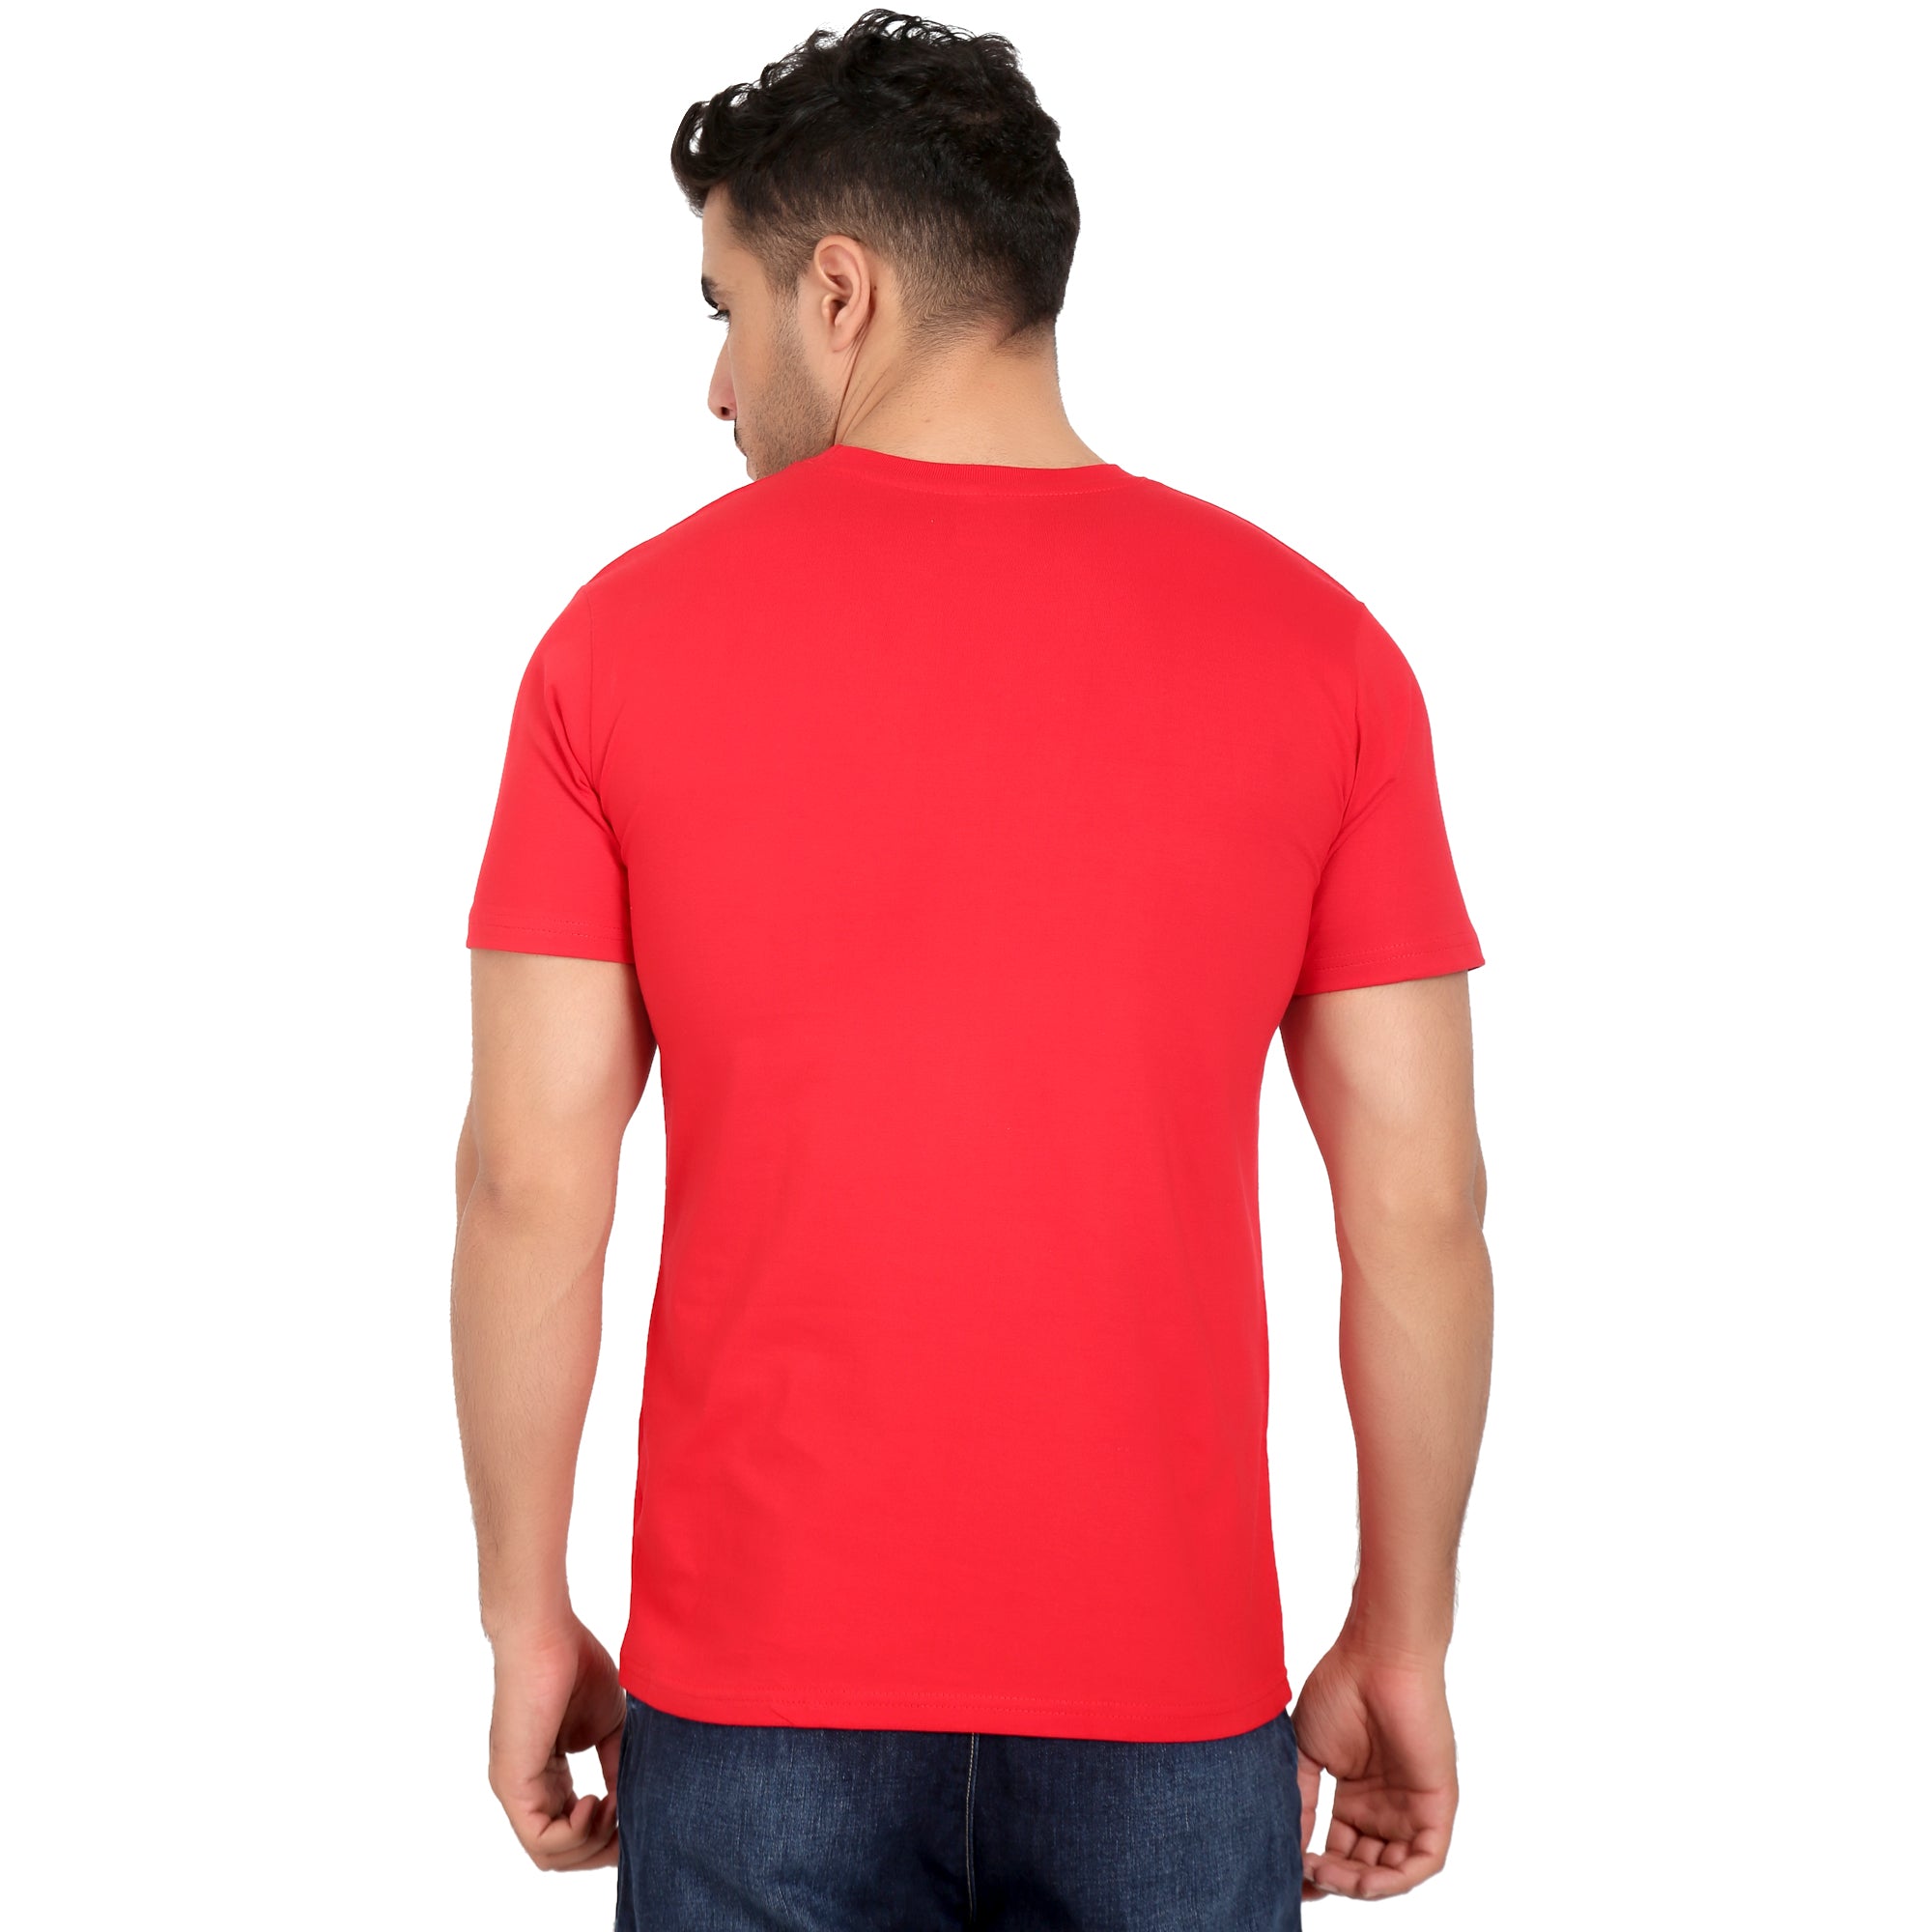 Combo Offer - Men Crew Neck Cotton T-Shirts - Half Sleeves - 3 Colors - Red, Yellow & White